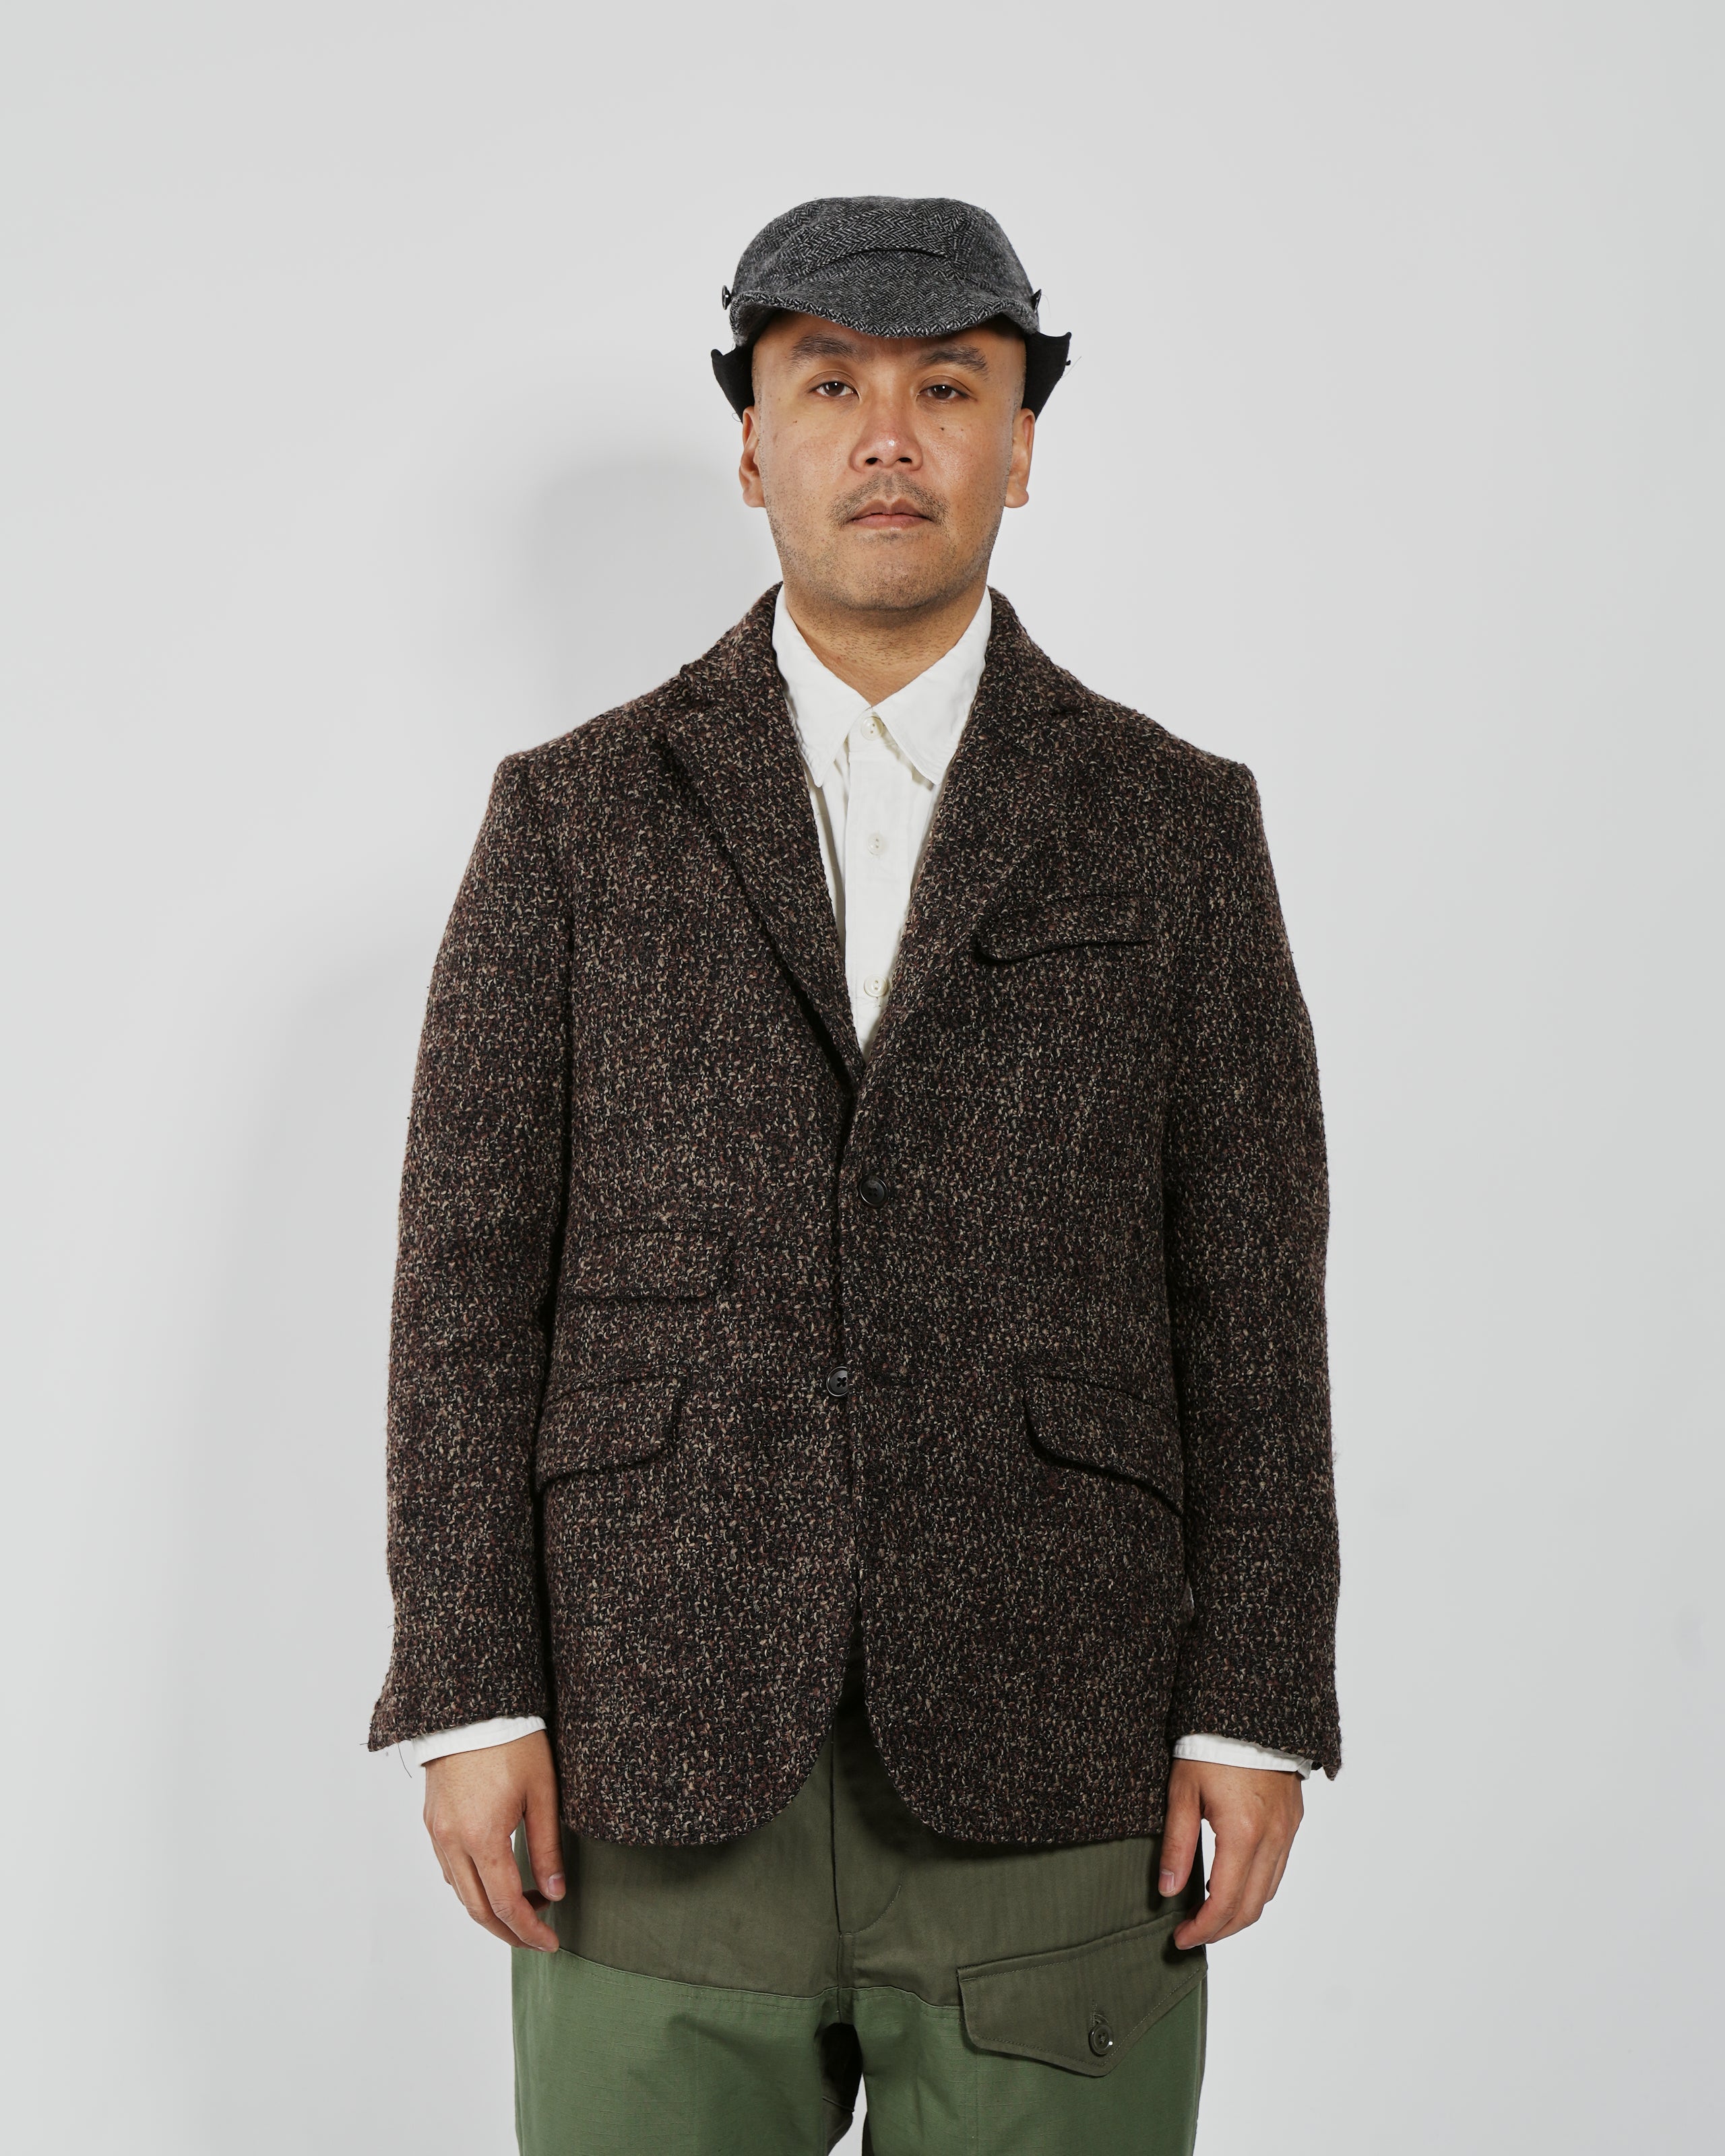 Andover Jacket - Dk. Brown Polyester Wool Tweed Boucle | Nepenthes